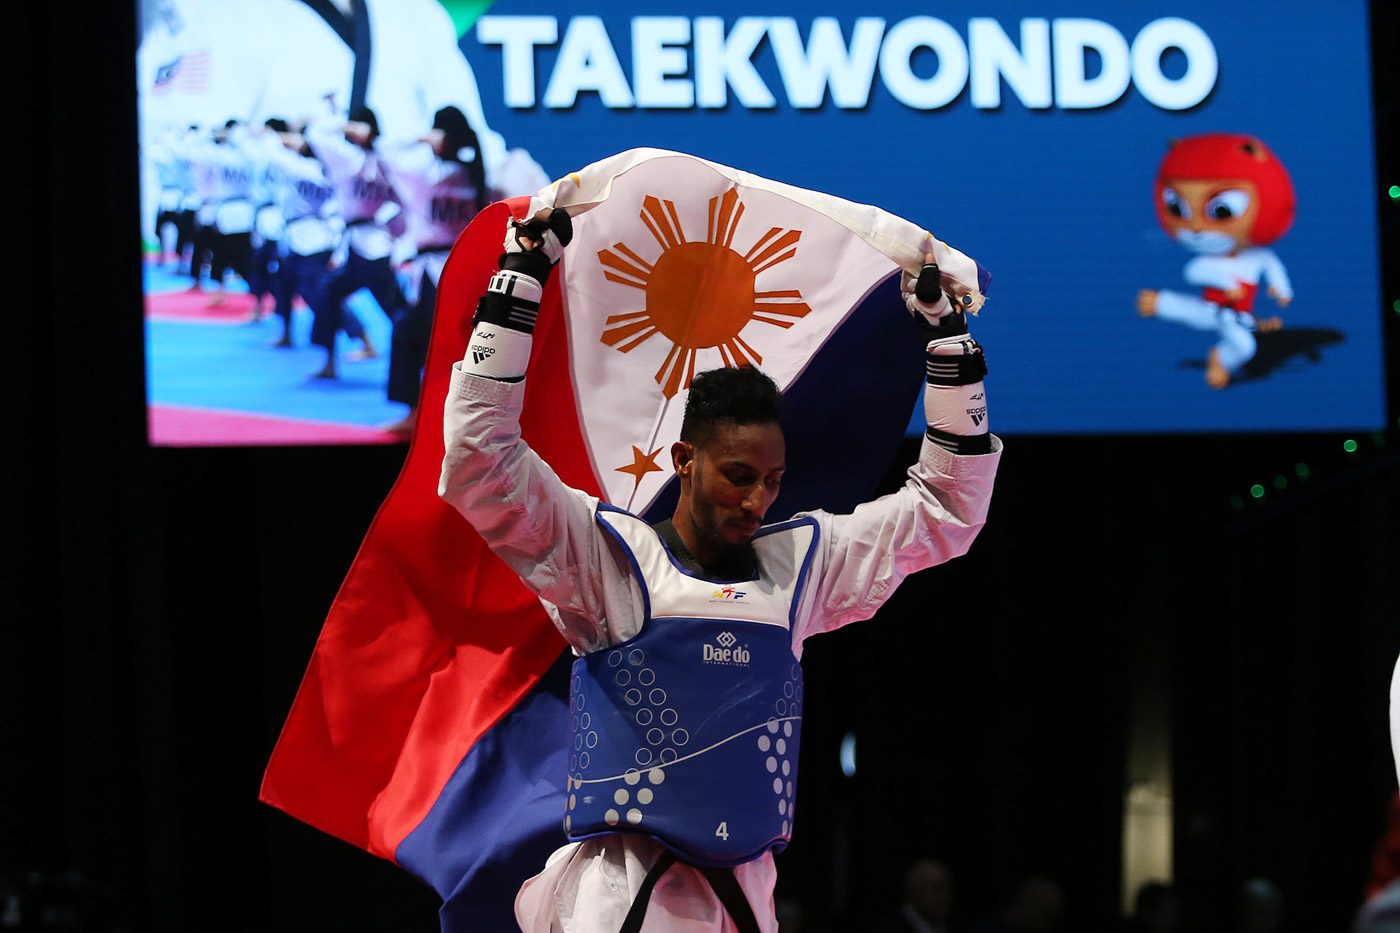 WINNER. Samuel Thomas Harper Morrison of the Philippines battles Ardian Prayogo Dinggo of Indonesia in the finals of the men's -74kg taekwondo competition. Morrisson prevailed to win the gold medal. Photo from PSC-POC Media 